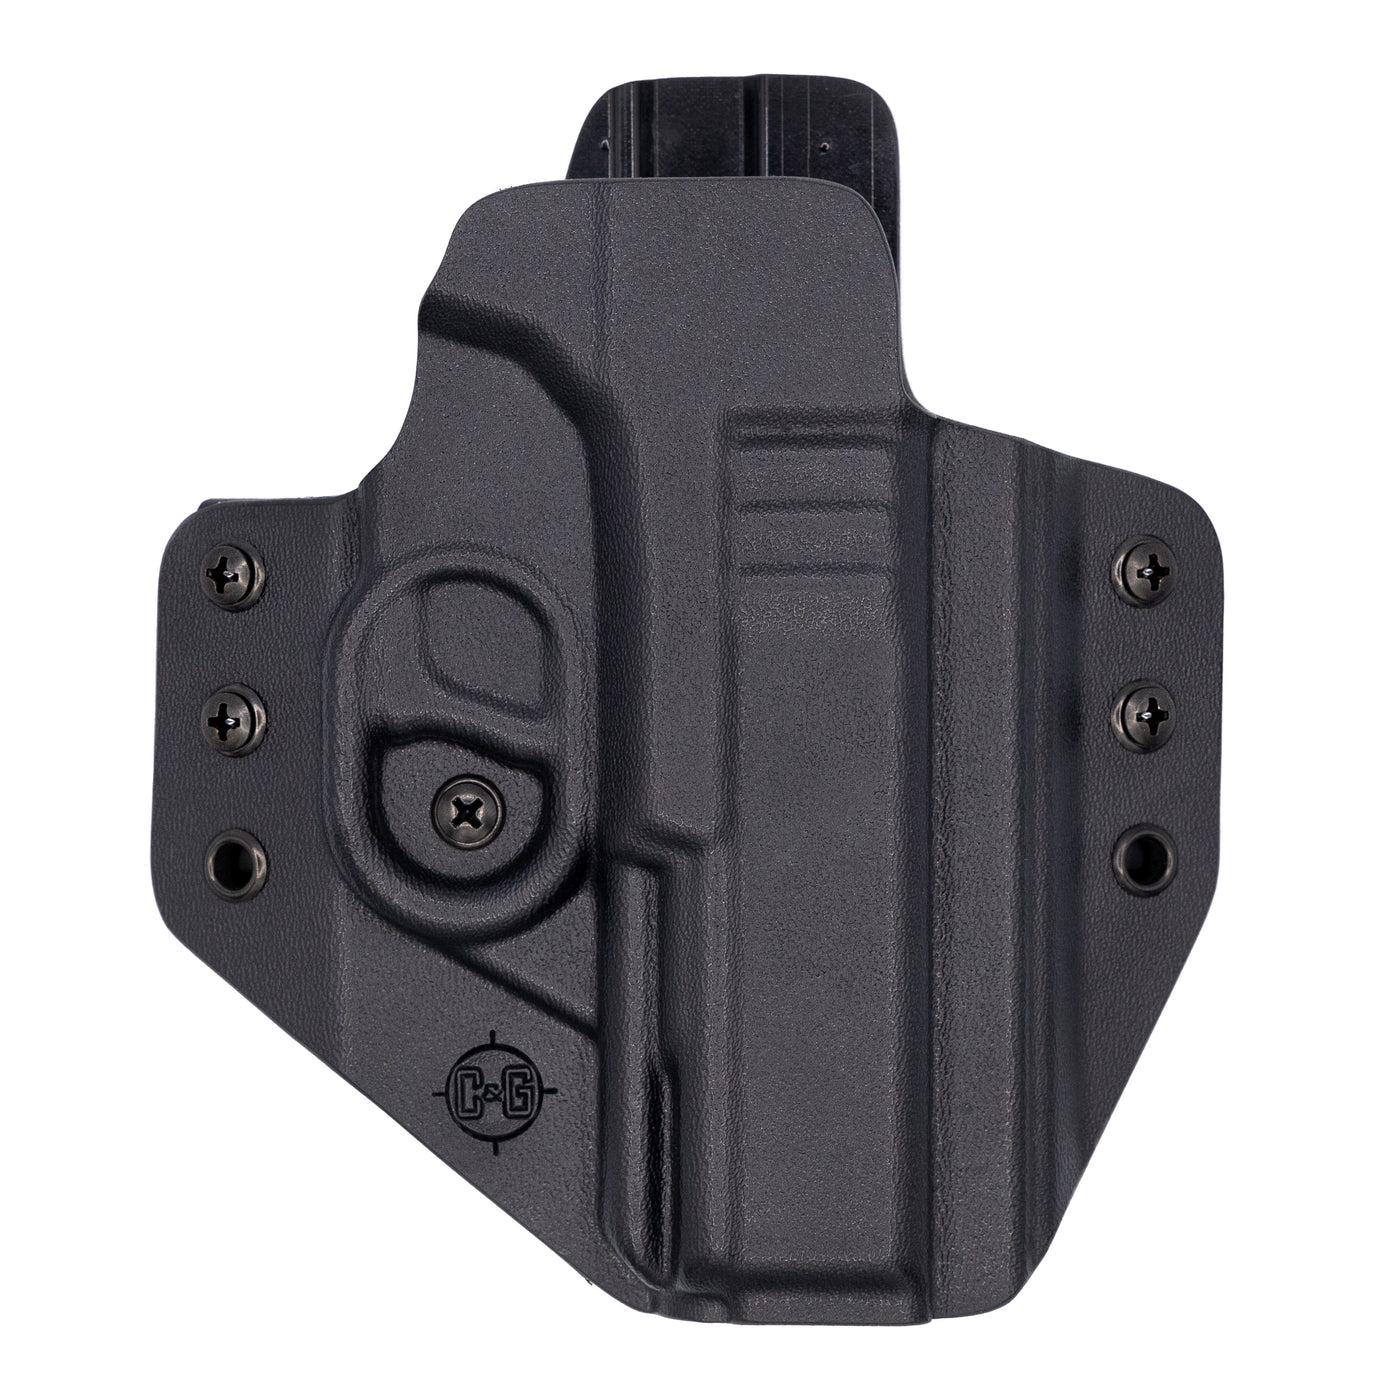 C&G Holsters OWB Outside the waistband Holster for the Polymer80 Poly80 PF9/40v2